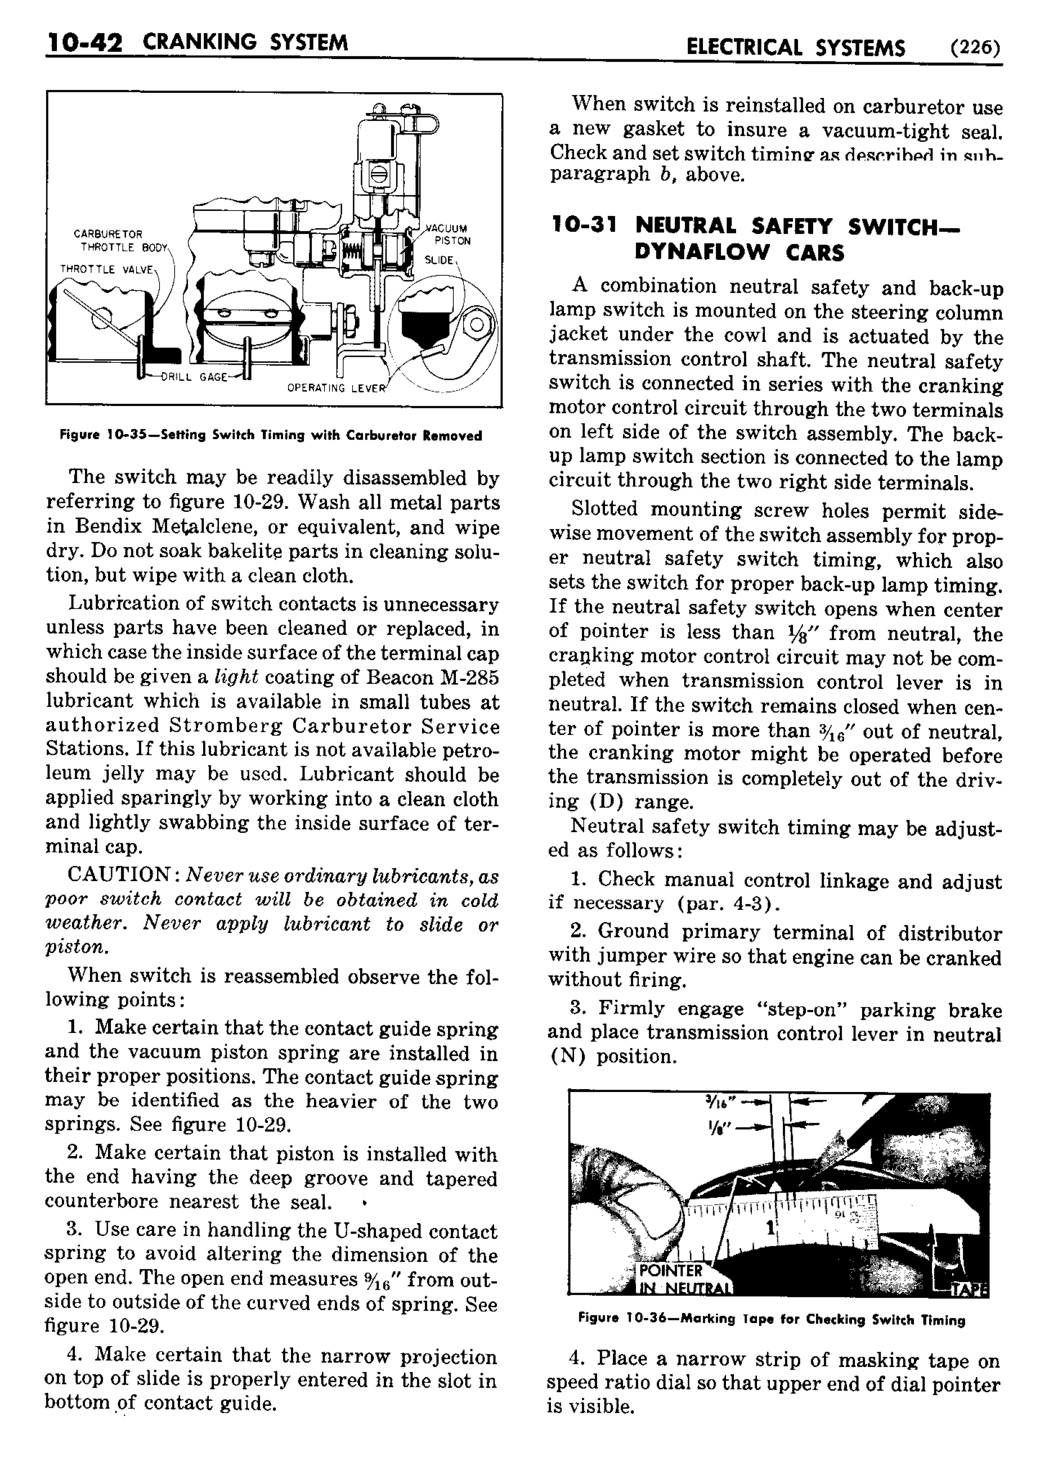 n_11 1953 Buick Shop Manual - Electrical Systems-042-042.jpg